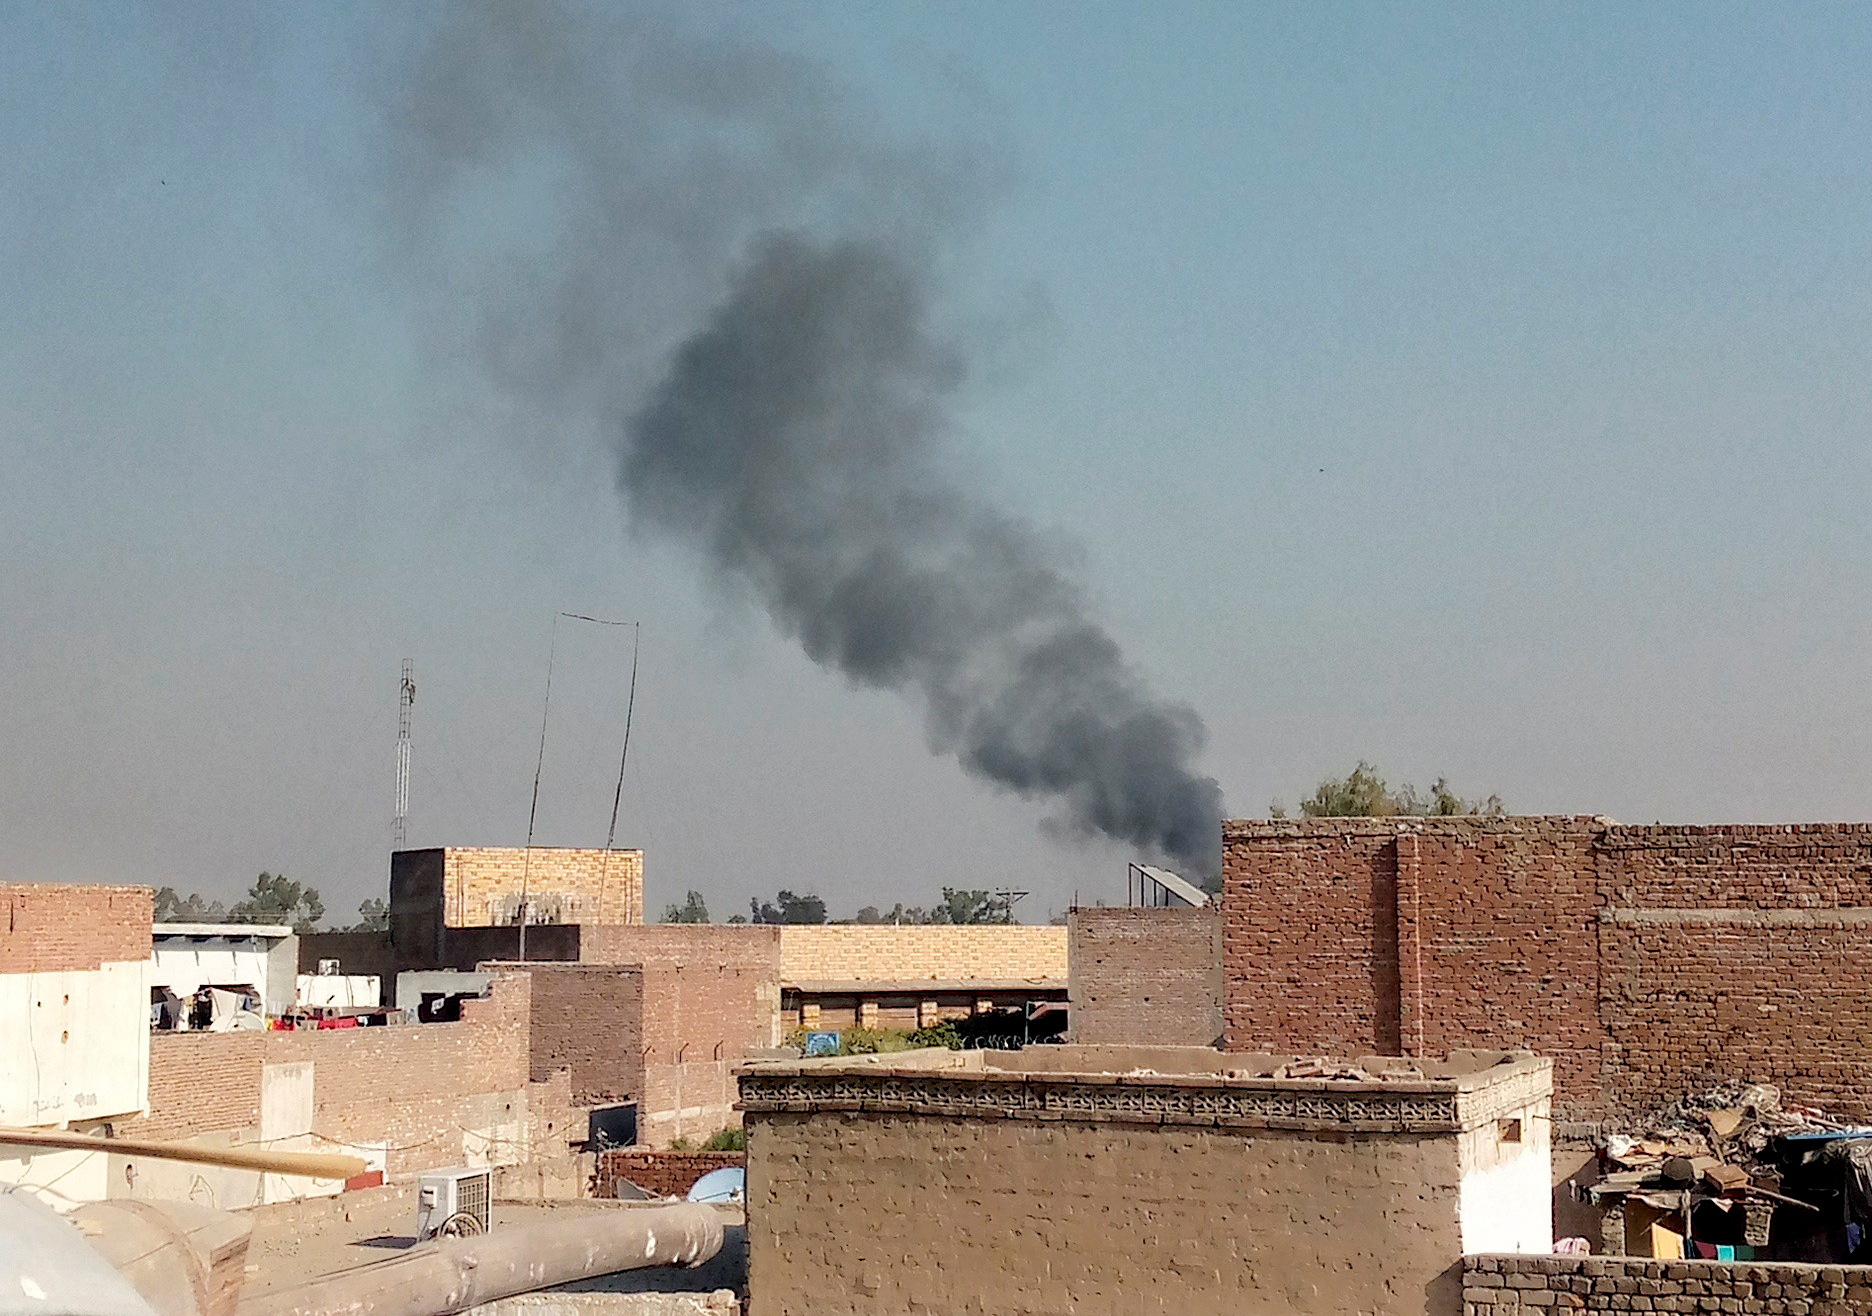 Smoke rises from the cantonment area in Bannu